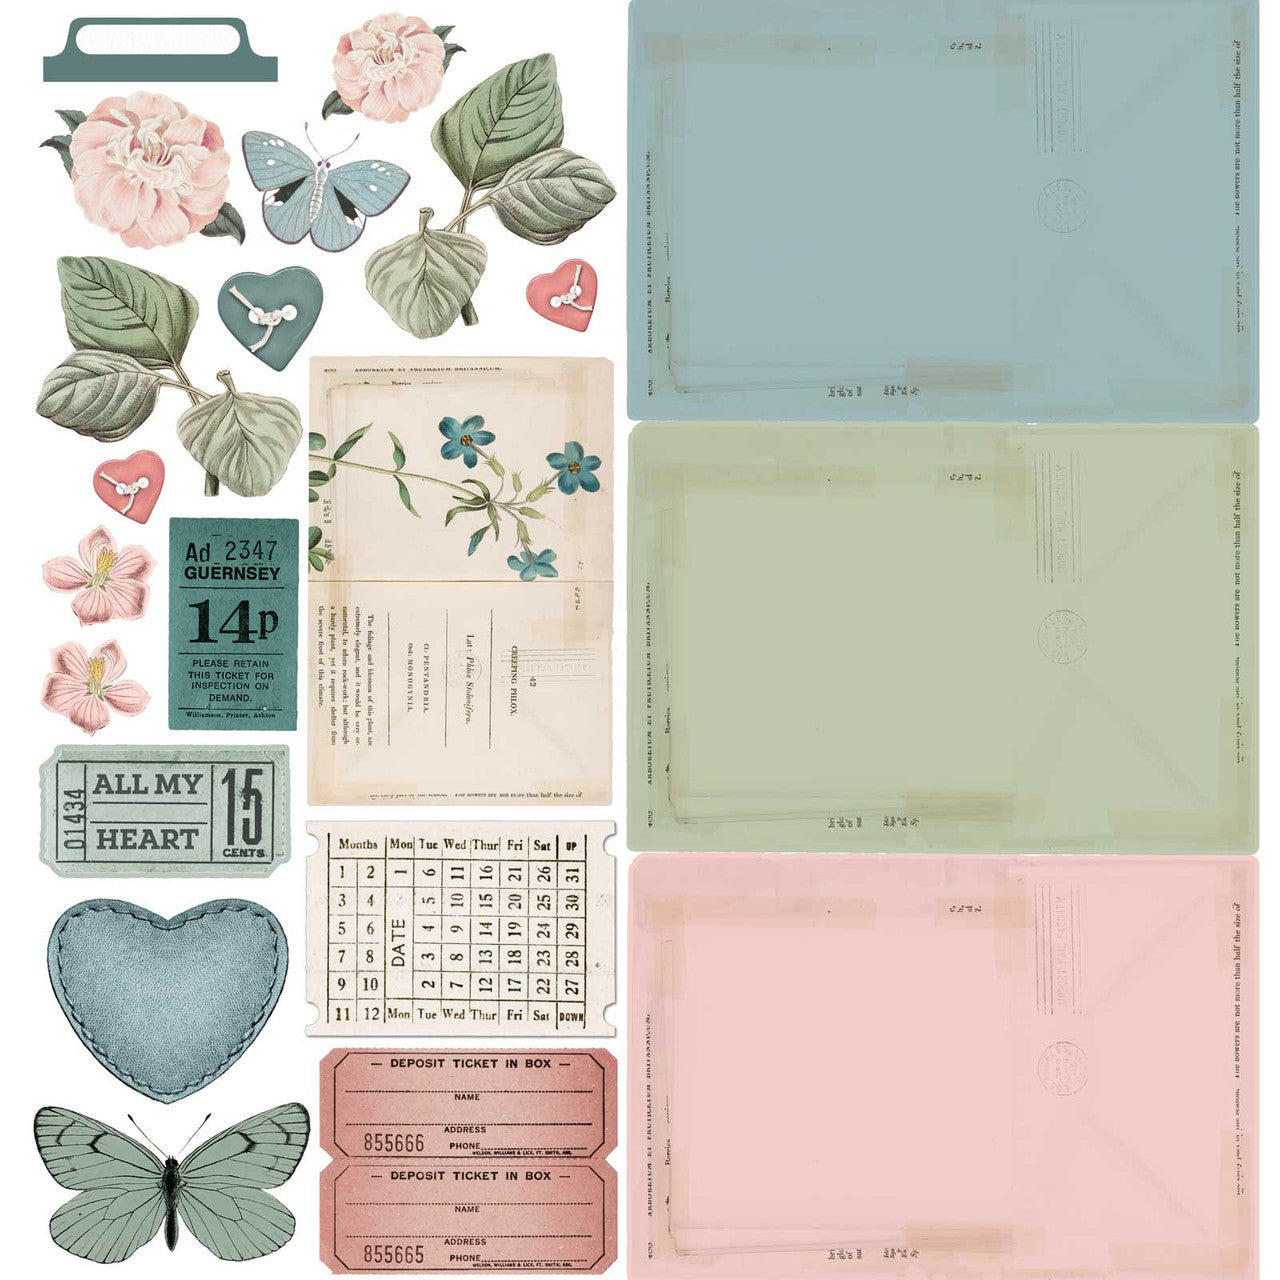 49 and Market Vintage Artistry Tranquility 12 x 12 Collection Paper Pack